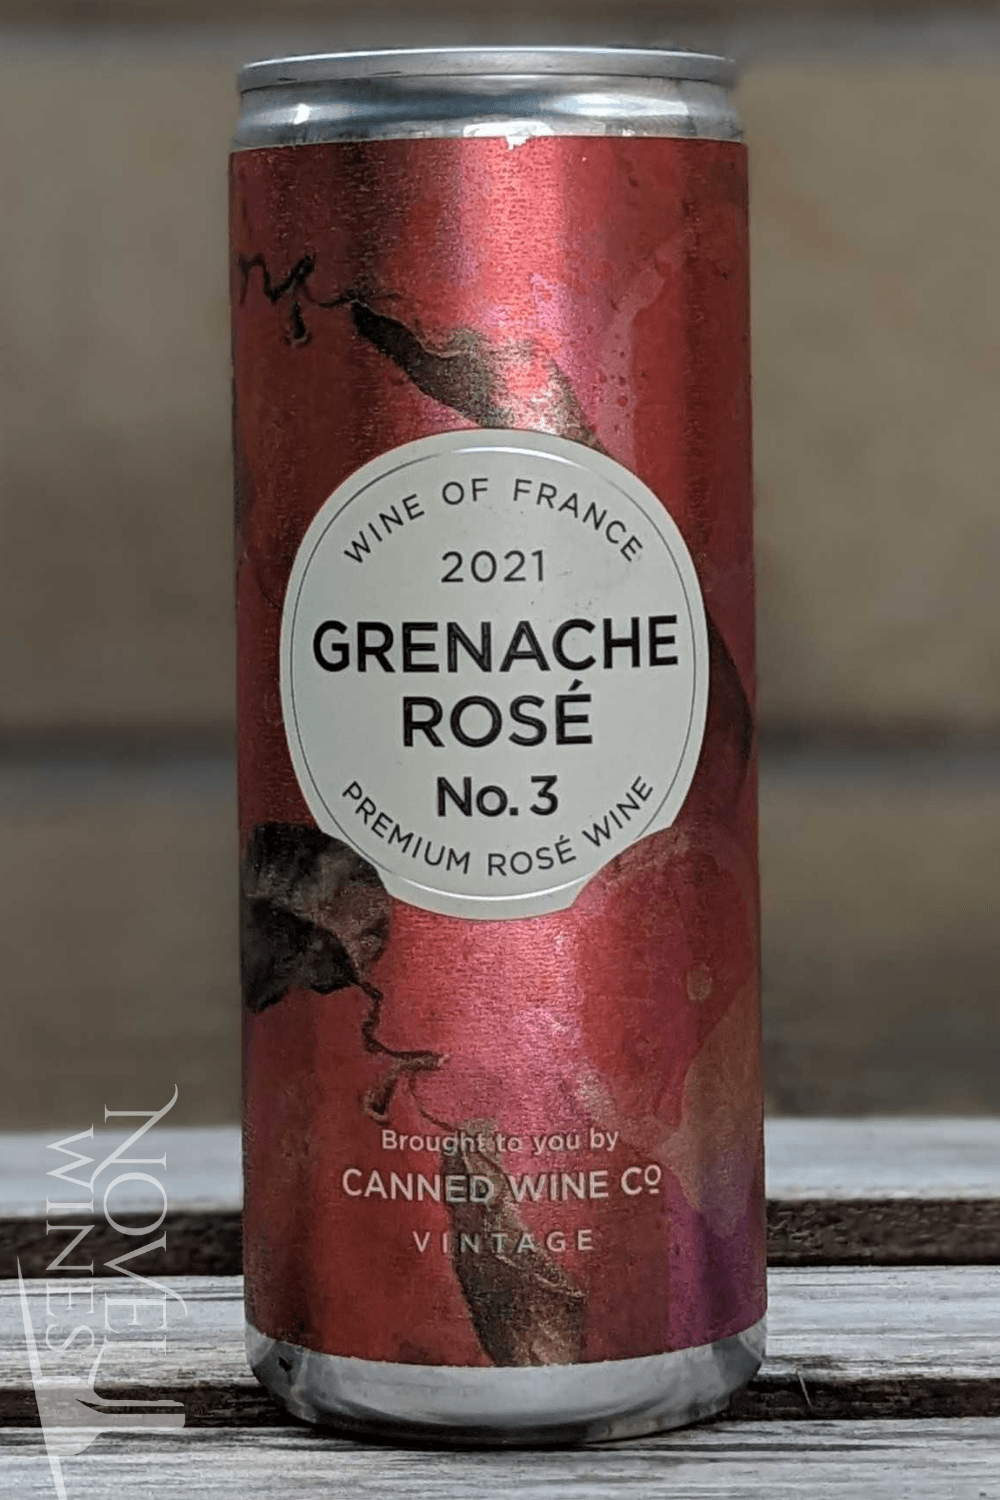 Canned Wine Co Rose Wine Canned Wine Co. Vintage Grenache Rosé 2021, France